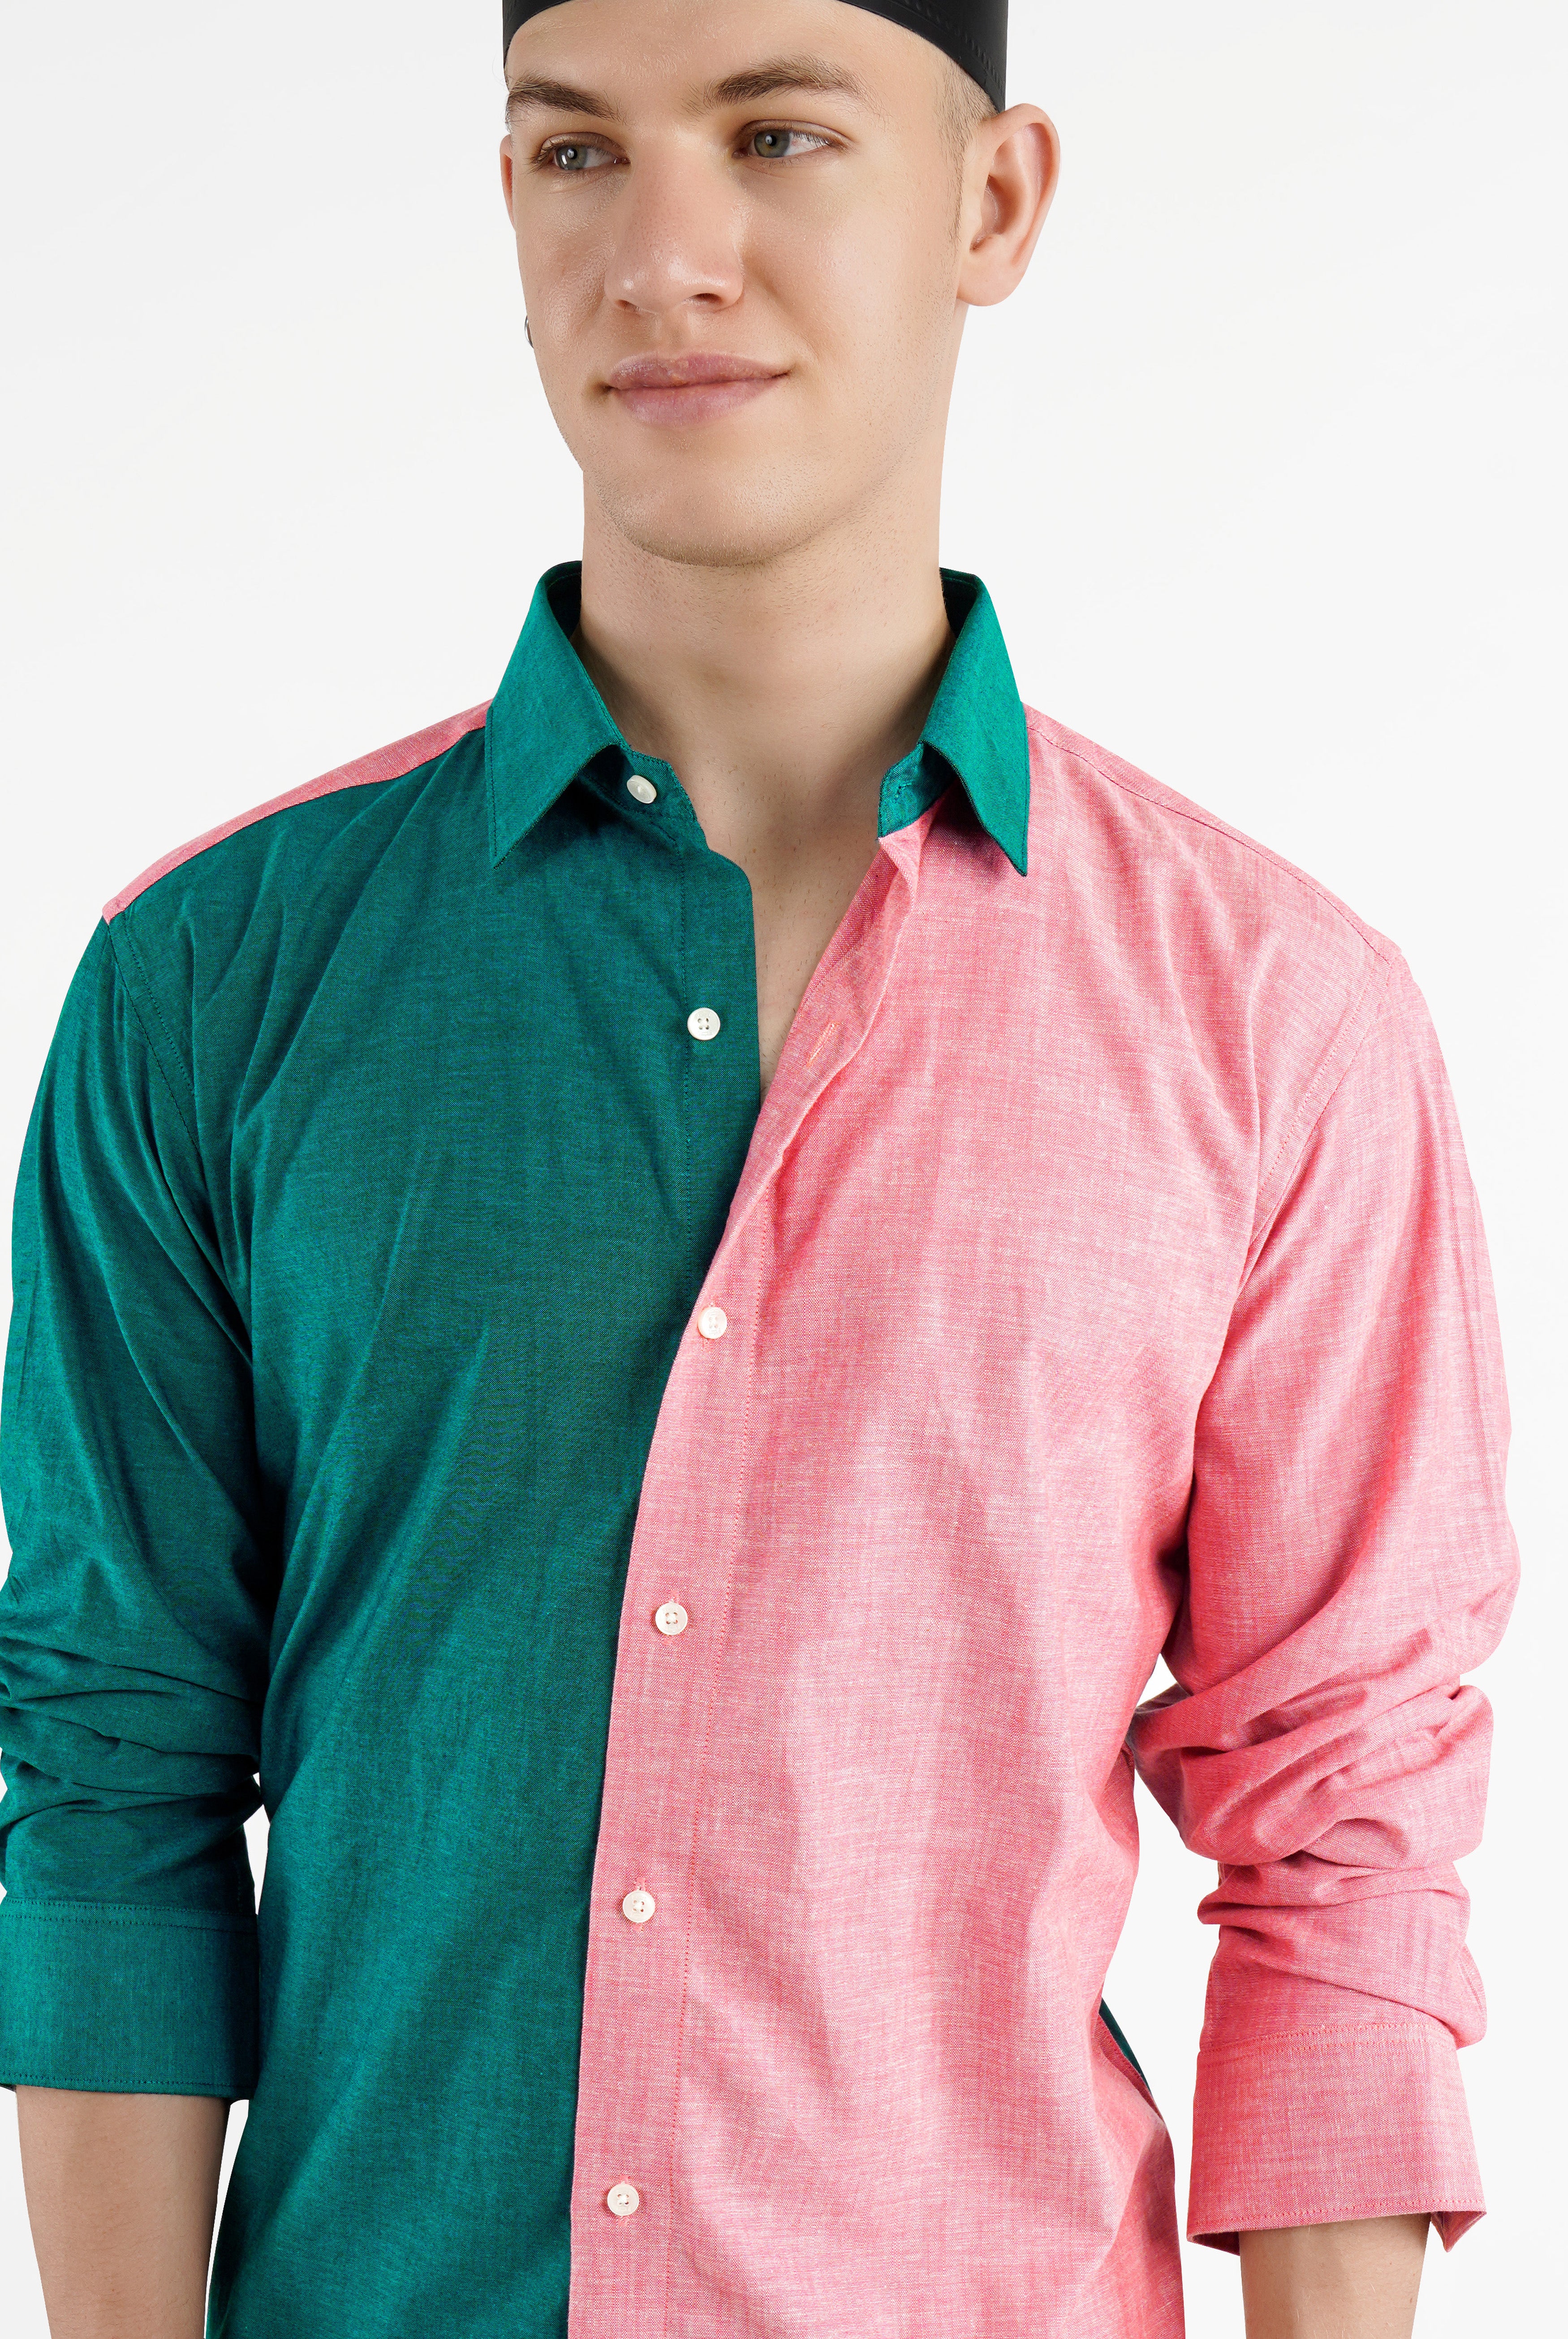 Cranberry Pink with Sherpa Green Funky Printed Royal Oxford Designer Shirt